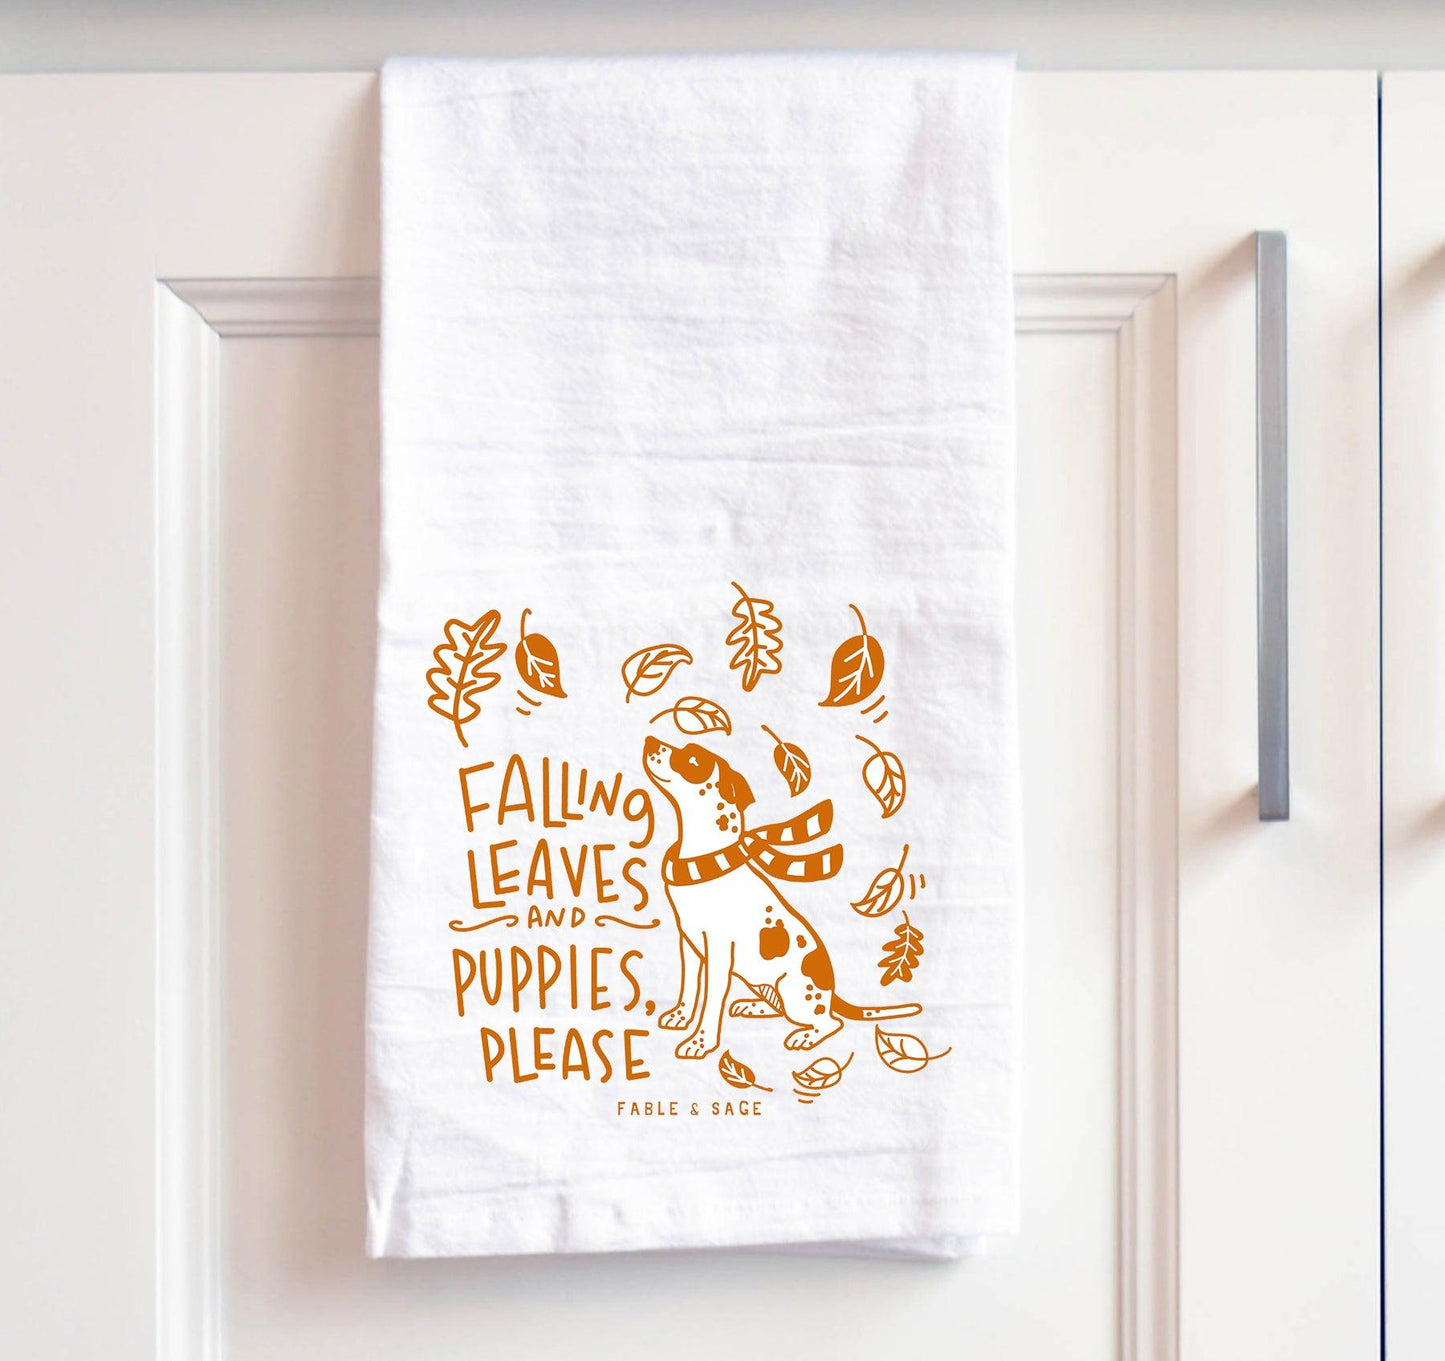 Hand printed kitchen towel of dog and falling leaves displayed on a kitchen cabinet door